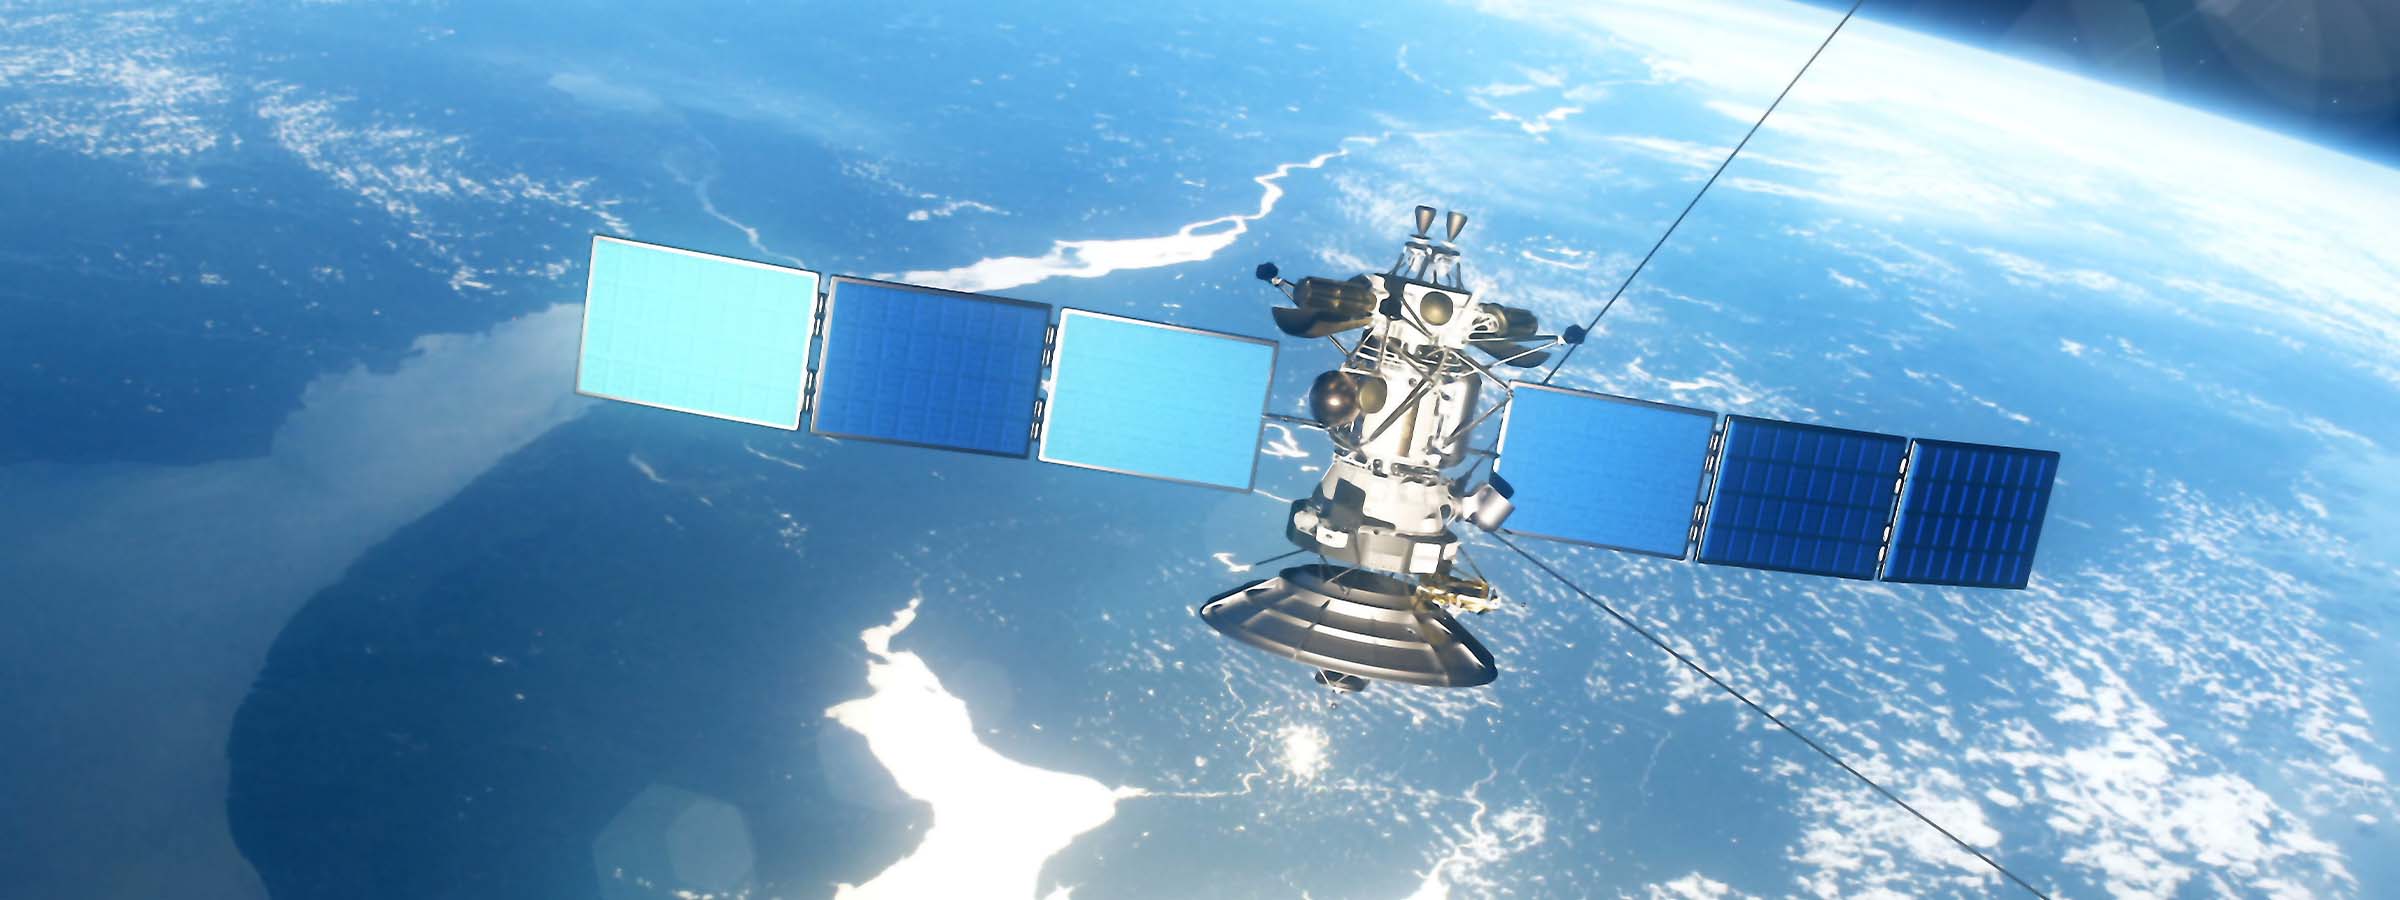 Low earth orbit satellite constellations will help more offshore remote operations to happen, with low latency satellite broadband links